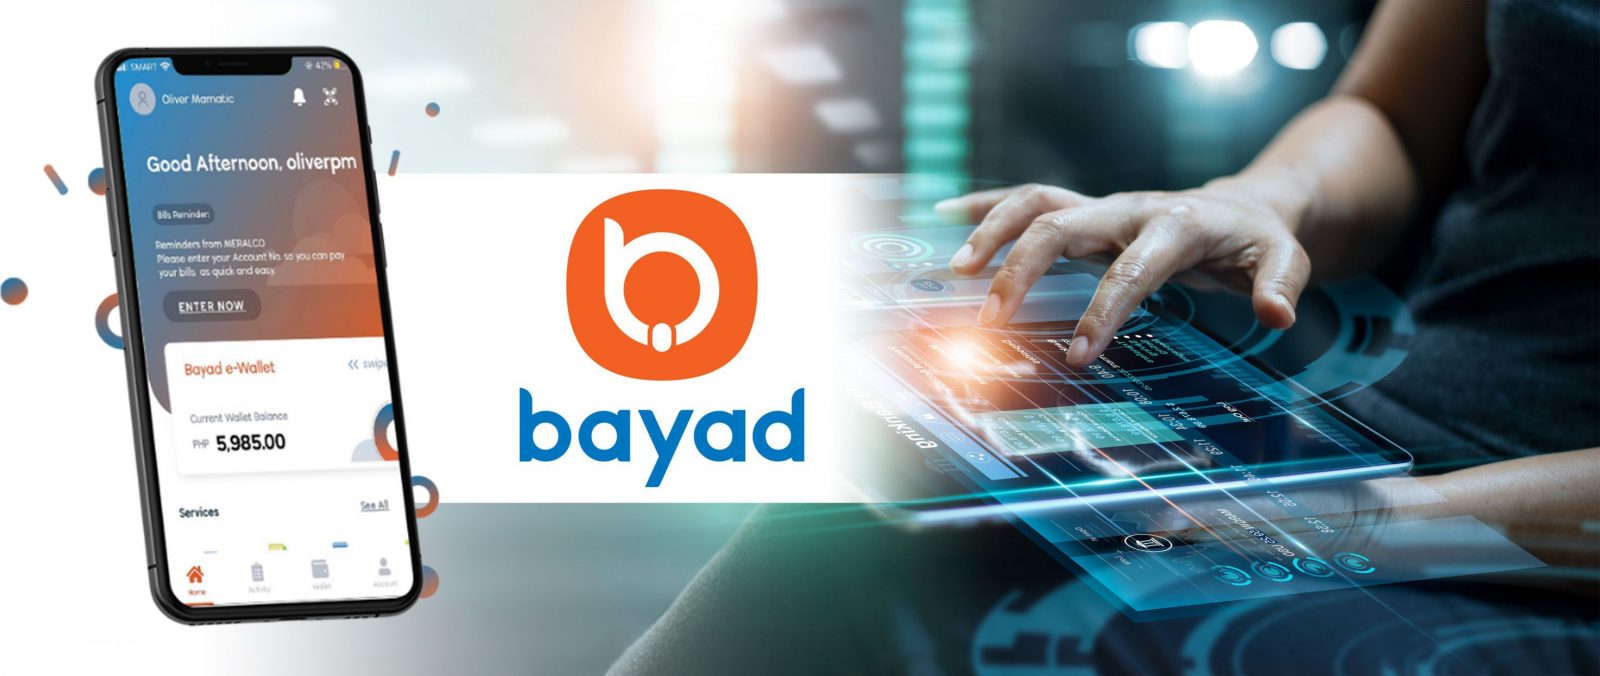 Bayad Center Update | Moldex Realty is now in Bayad App